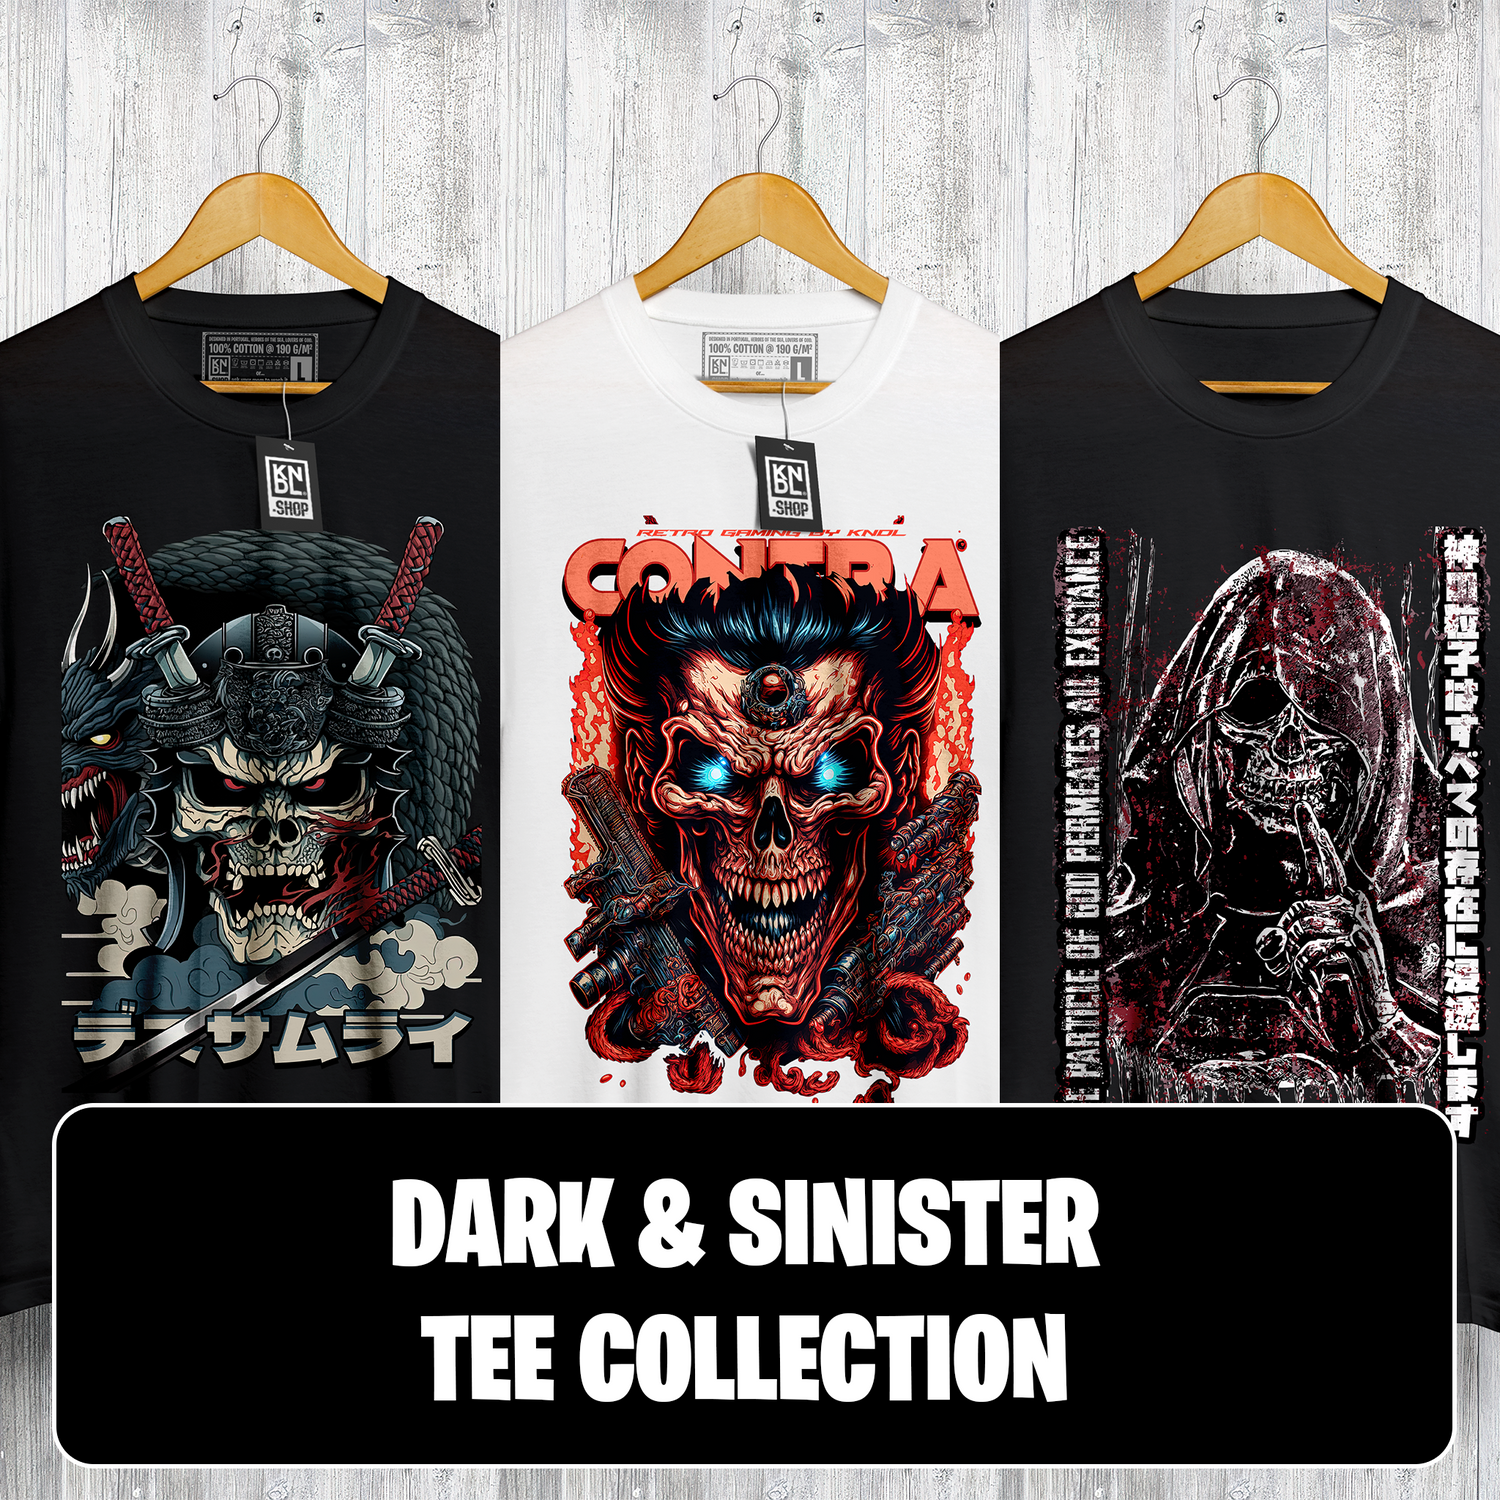 Dark & Sinister Tee Collection by KNDL®